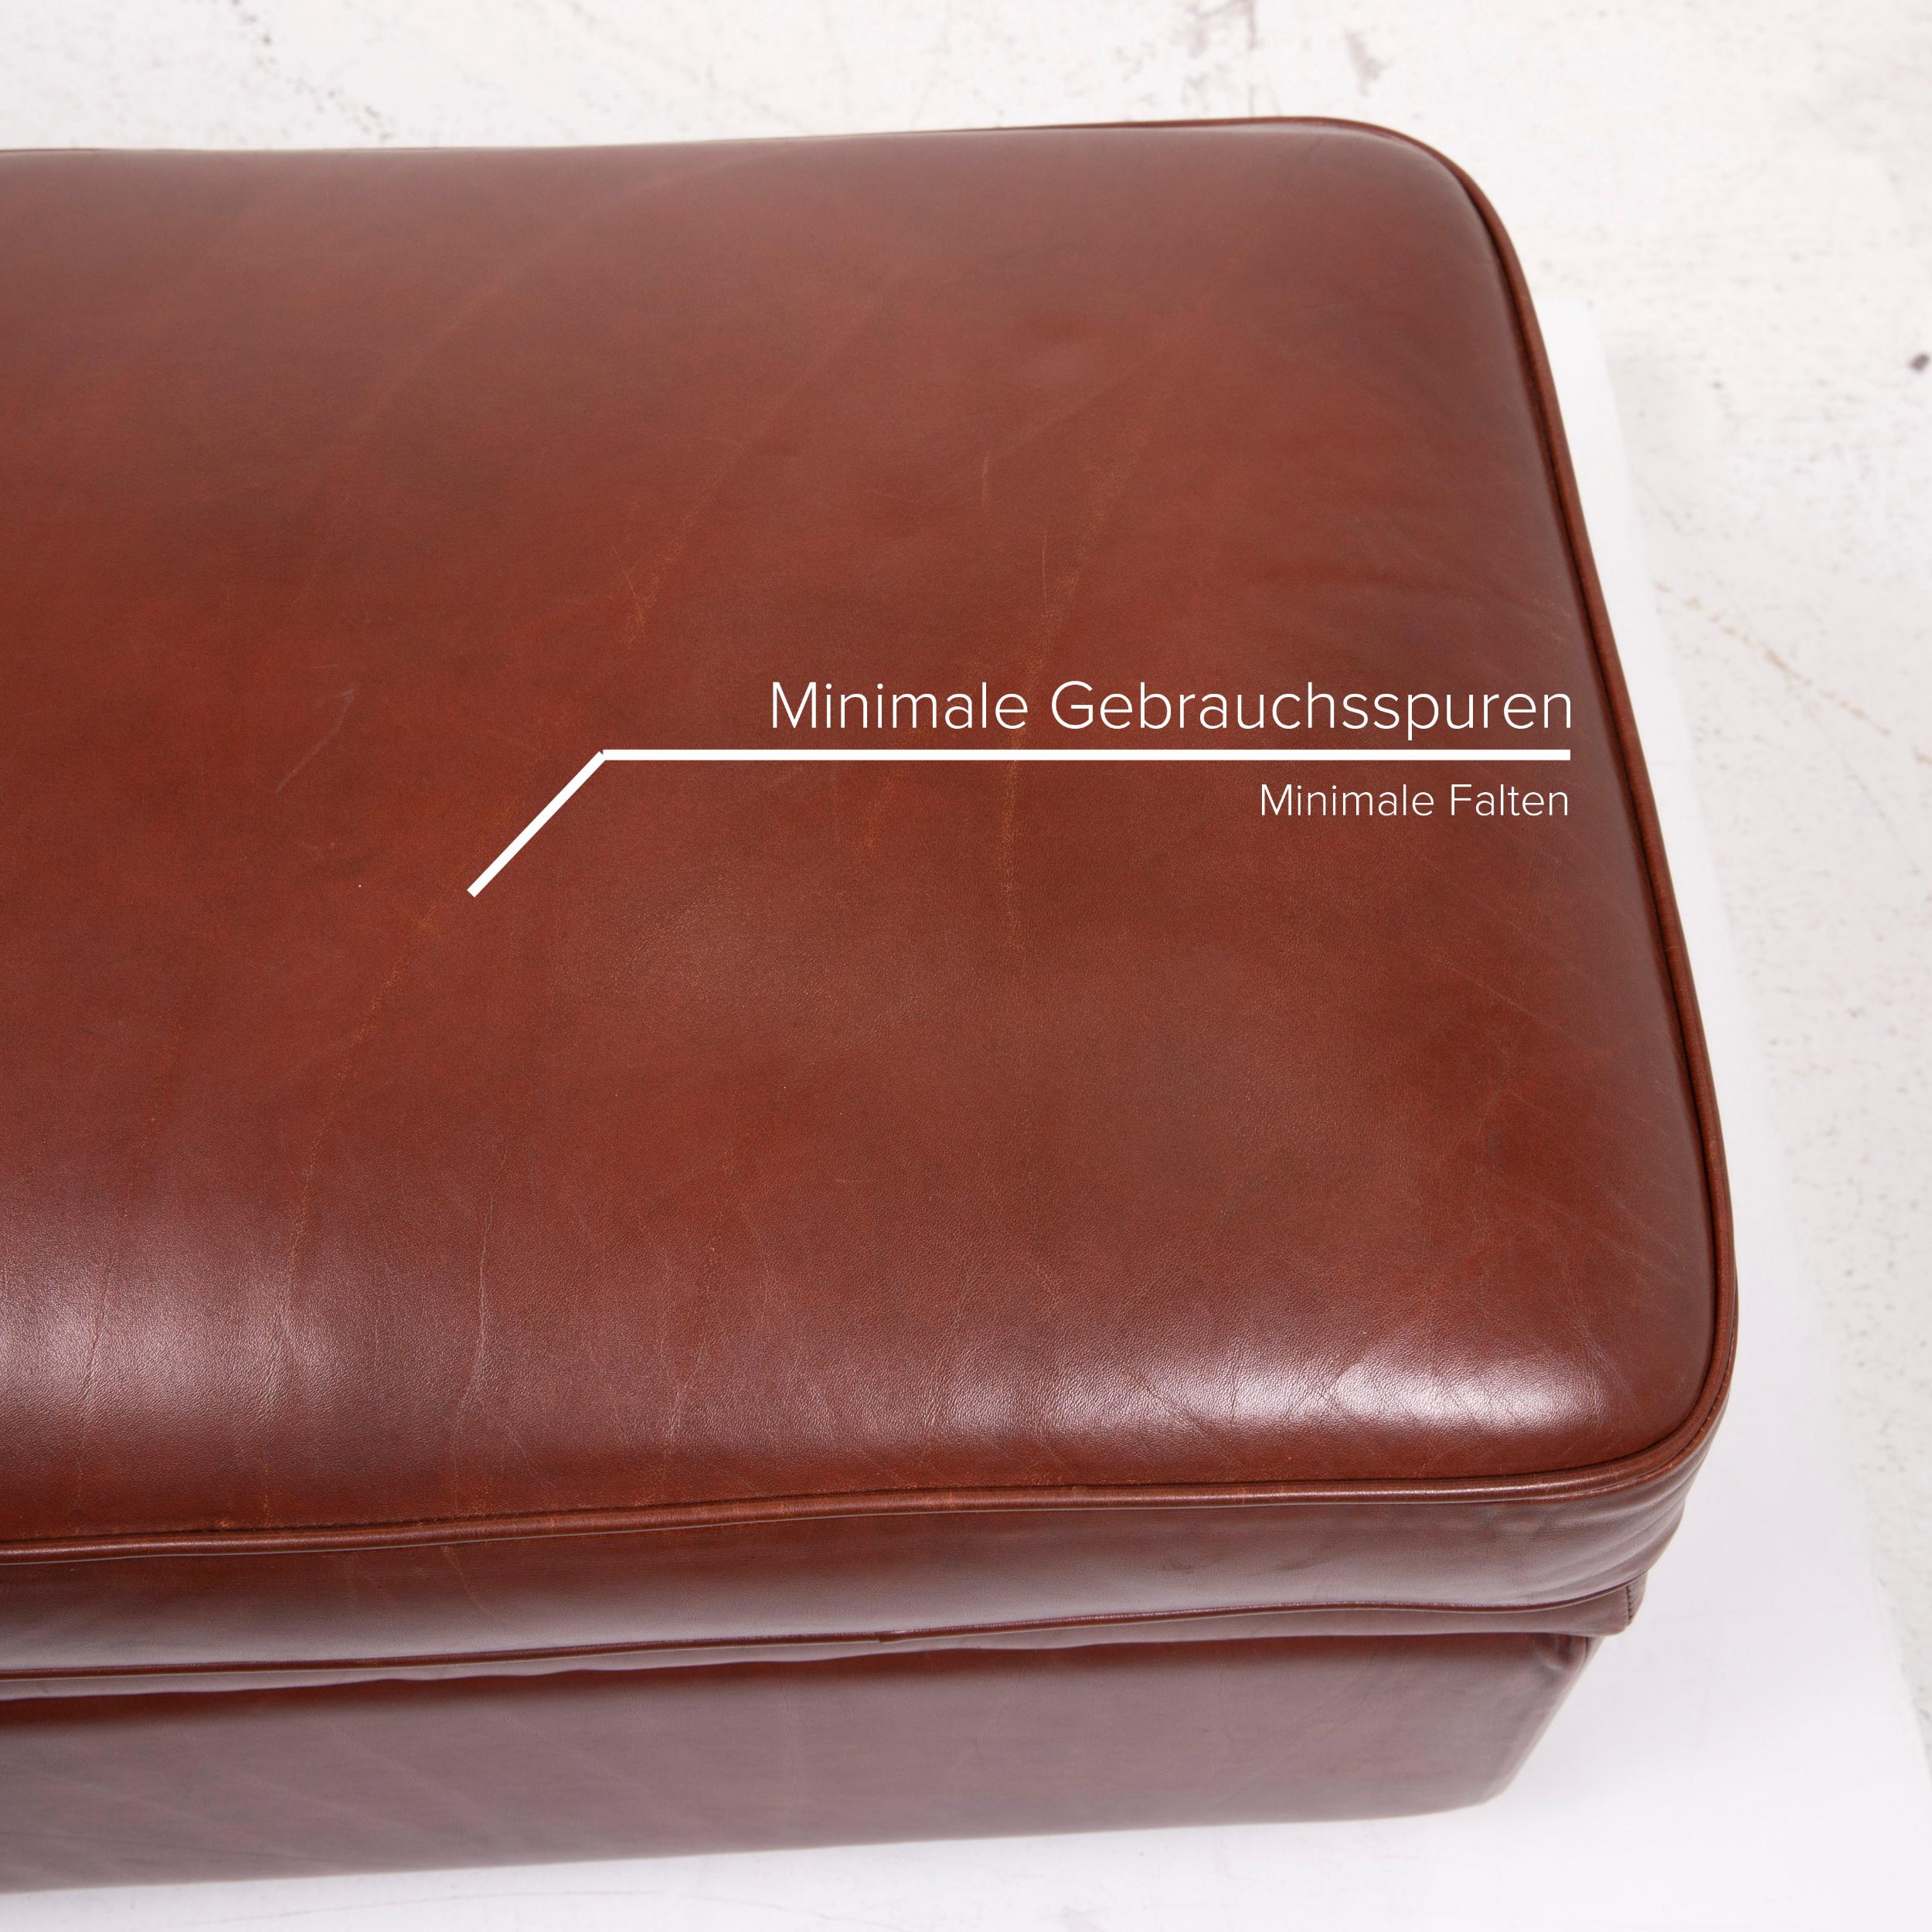 Poltrona Frau Leather Sofa Set Cognac Two-Seat Stool In Good Condition For Sale In Cologne, DE